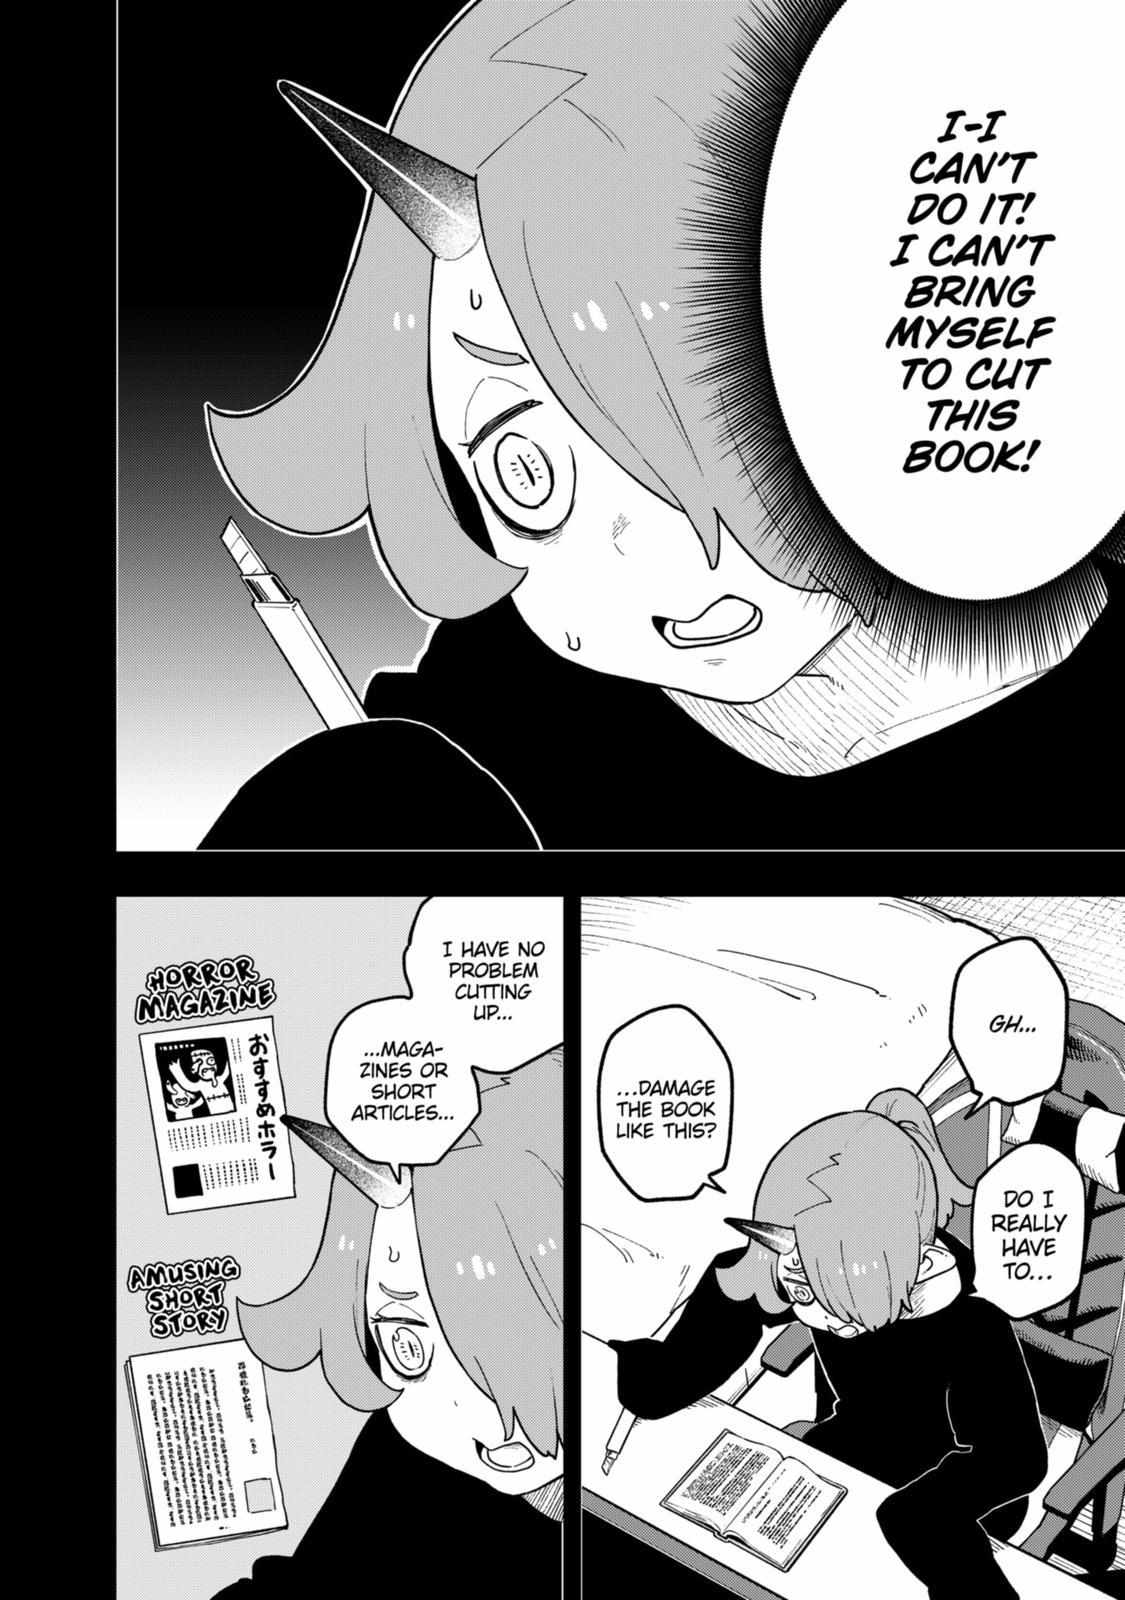 It's Time for "Interrogation", Princess! - chapter 190 - #5